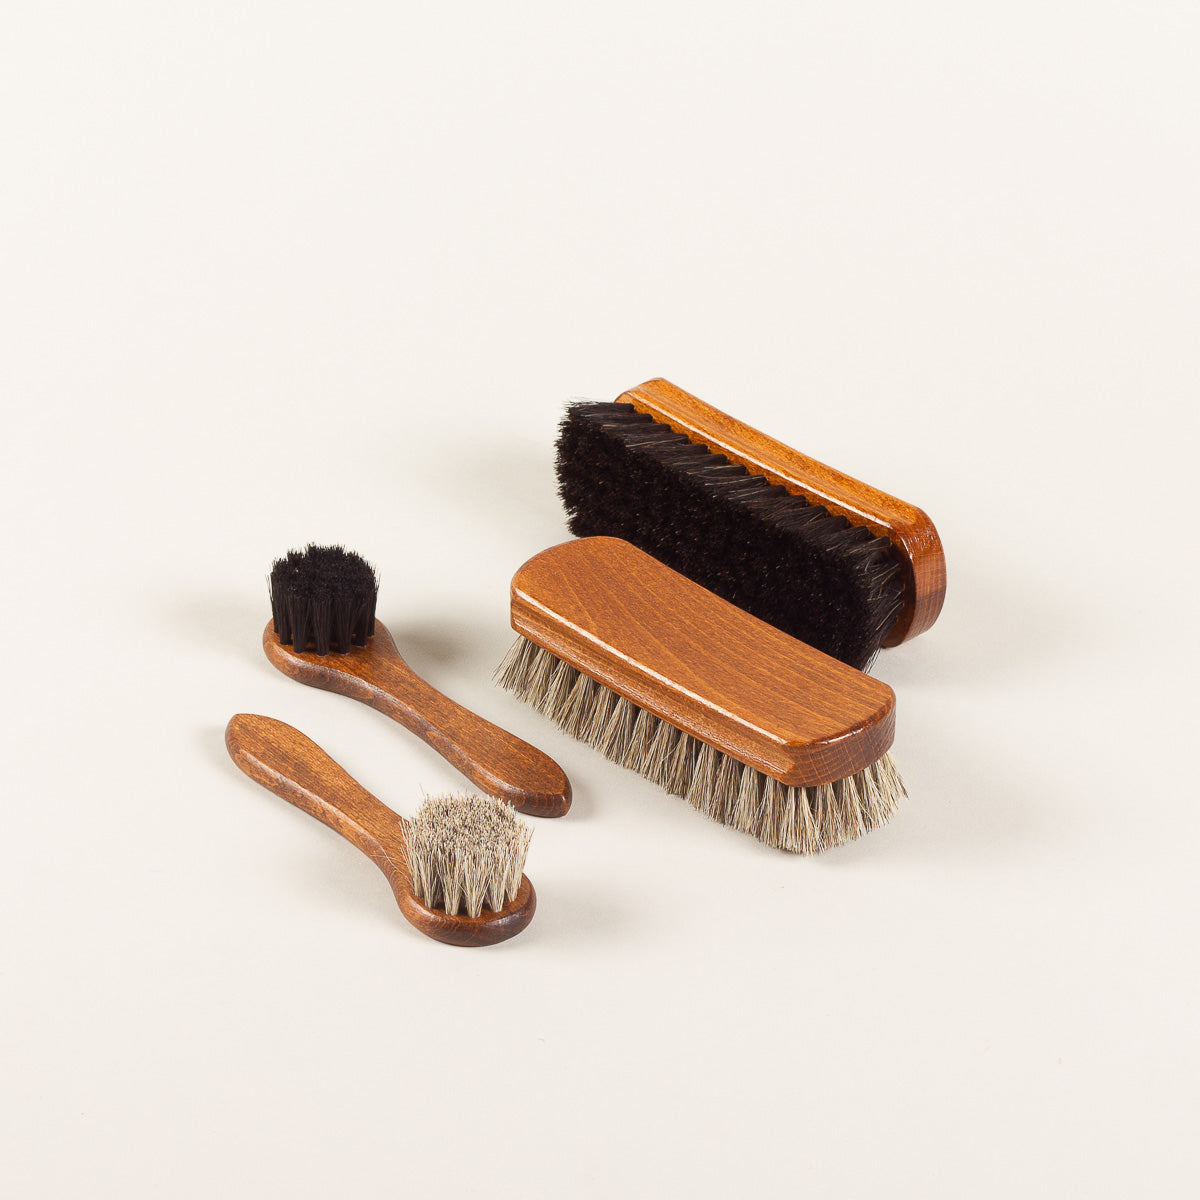 Why am I doing a post on of all things horse hair brushes?